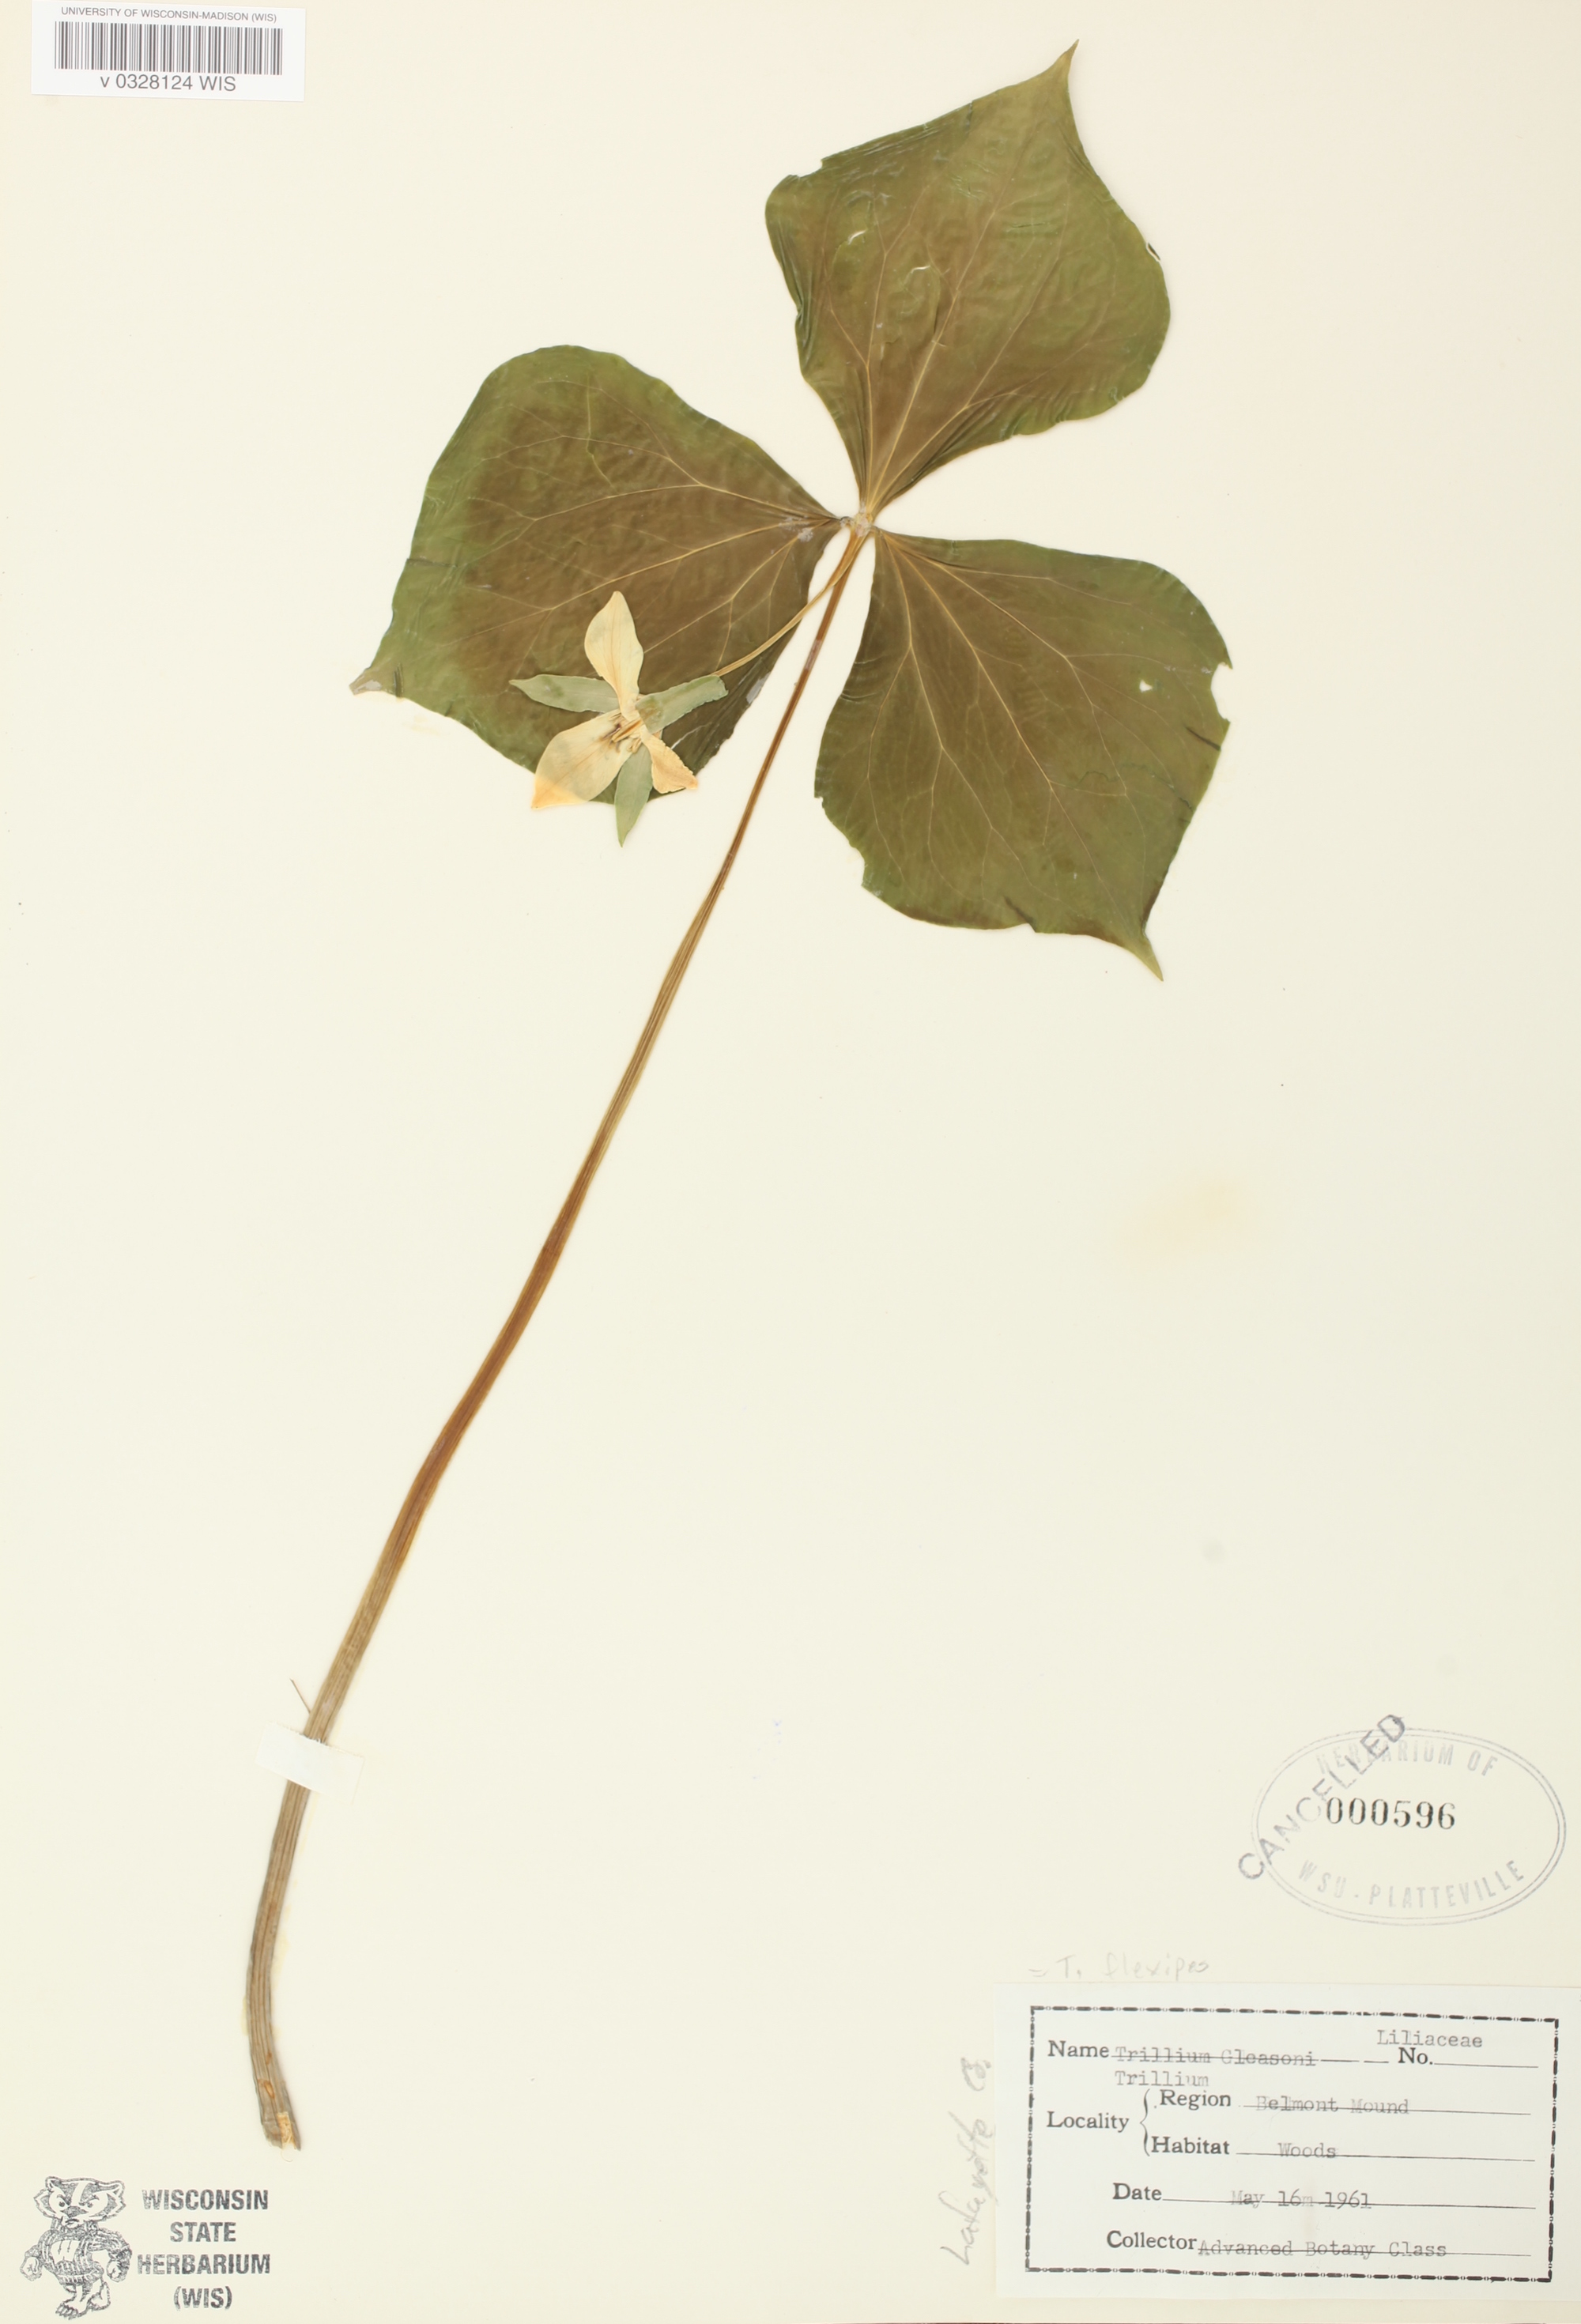 Trillium flexipes specimen collected on May 16,1961 in Lafayette County near Belmont Mound.